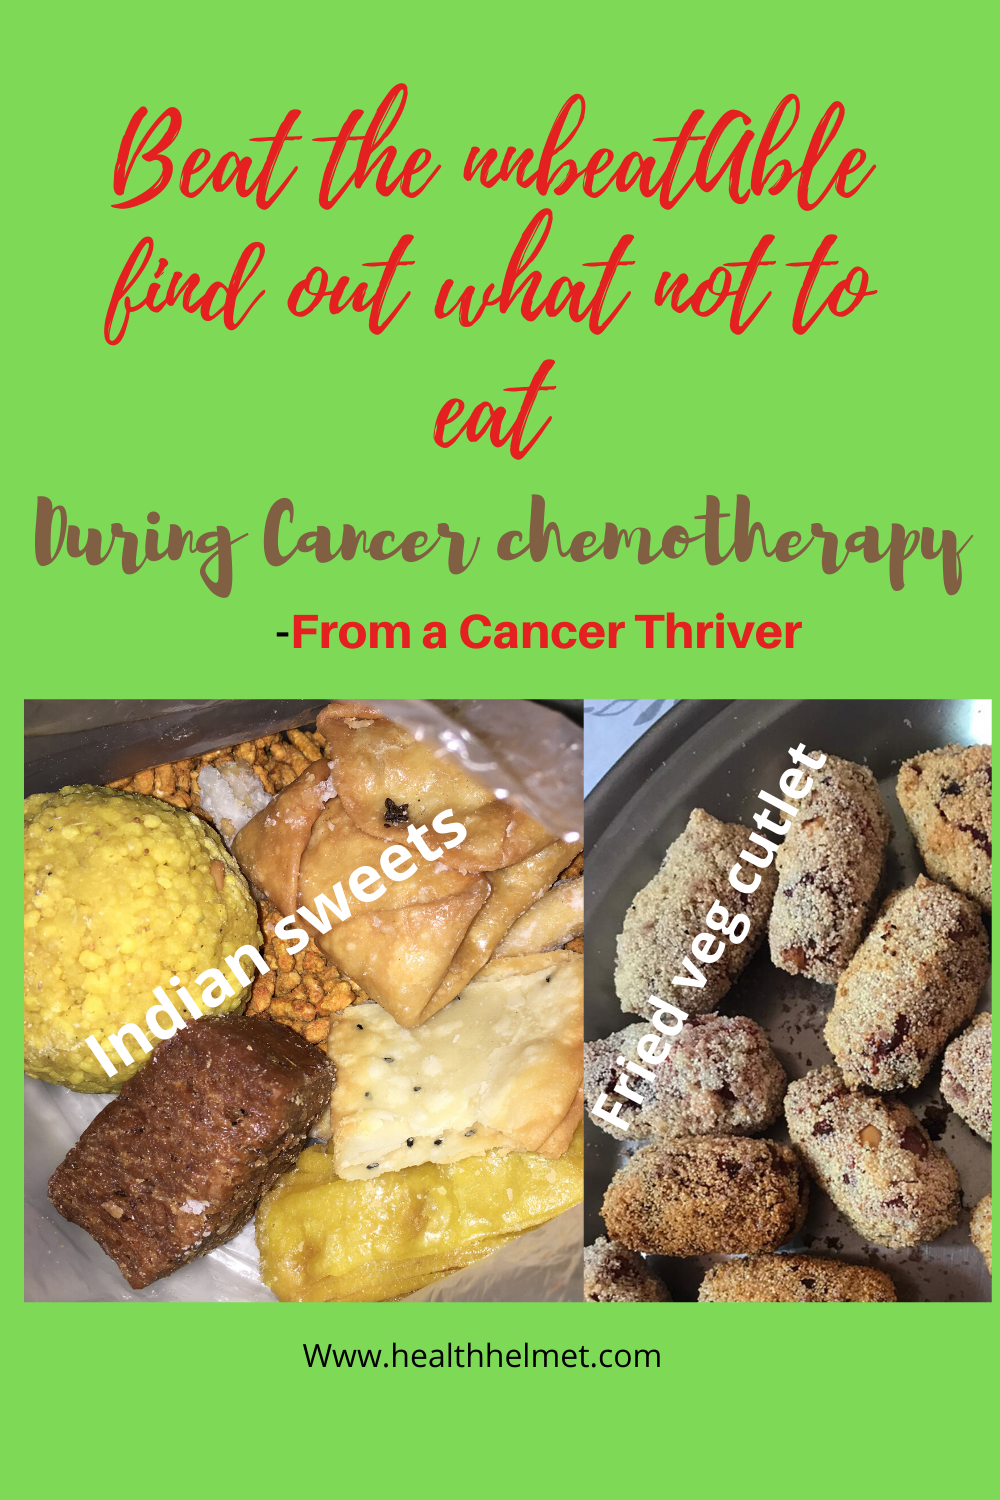 Foods-not-to-eat-during-chemotherapy